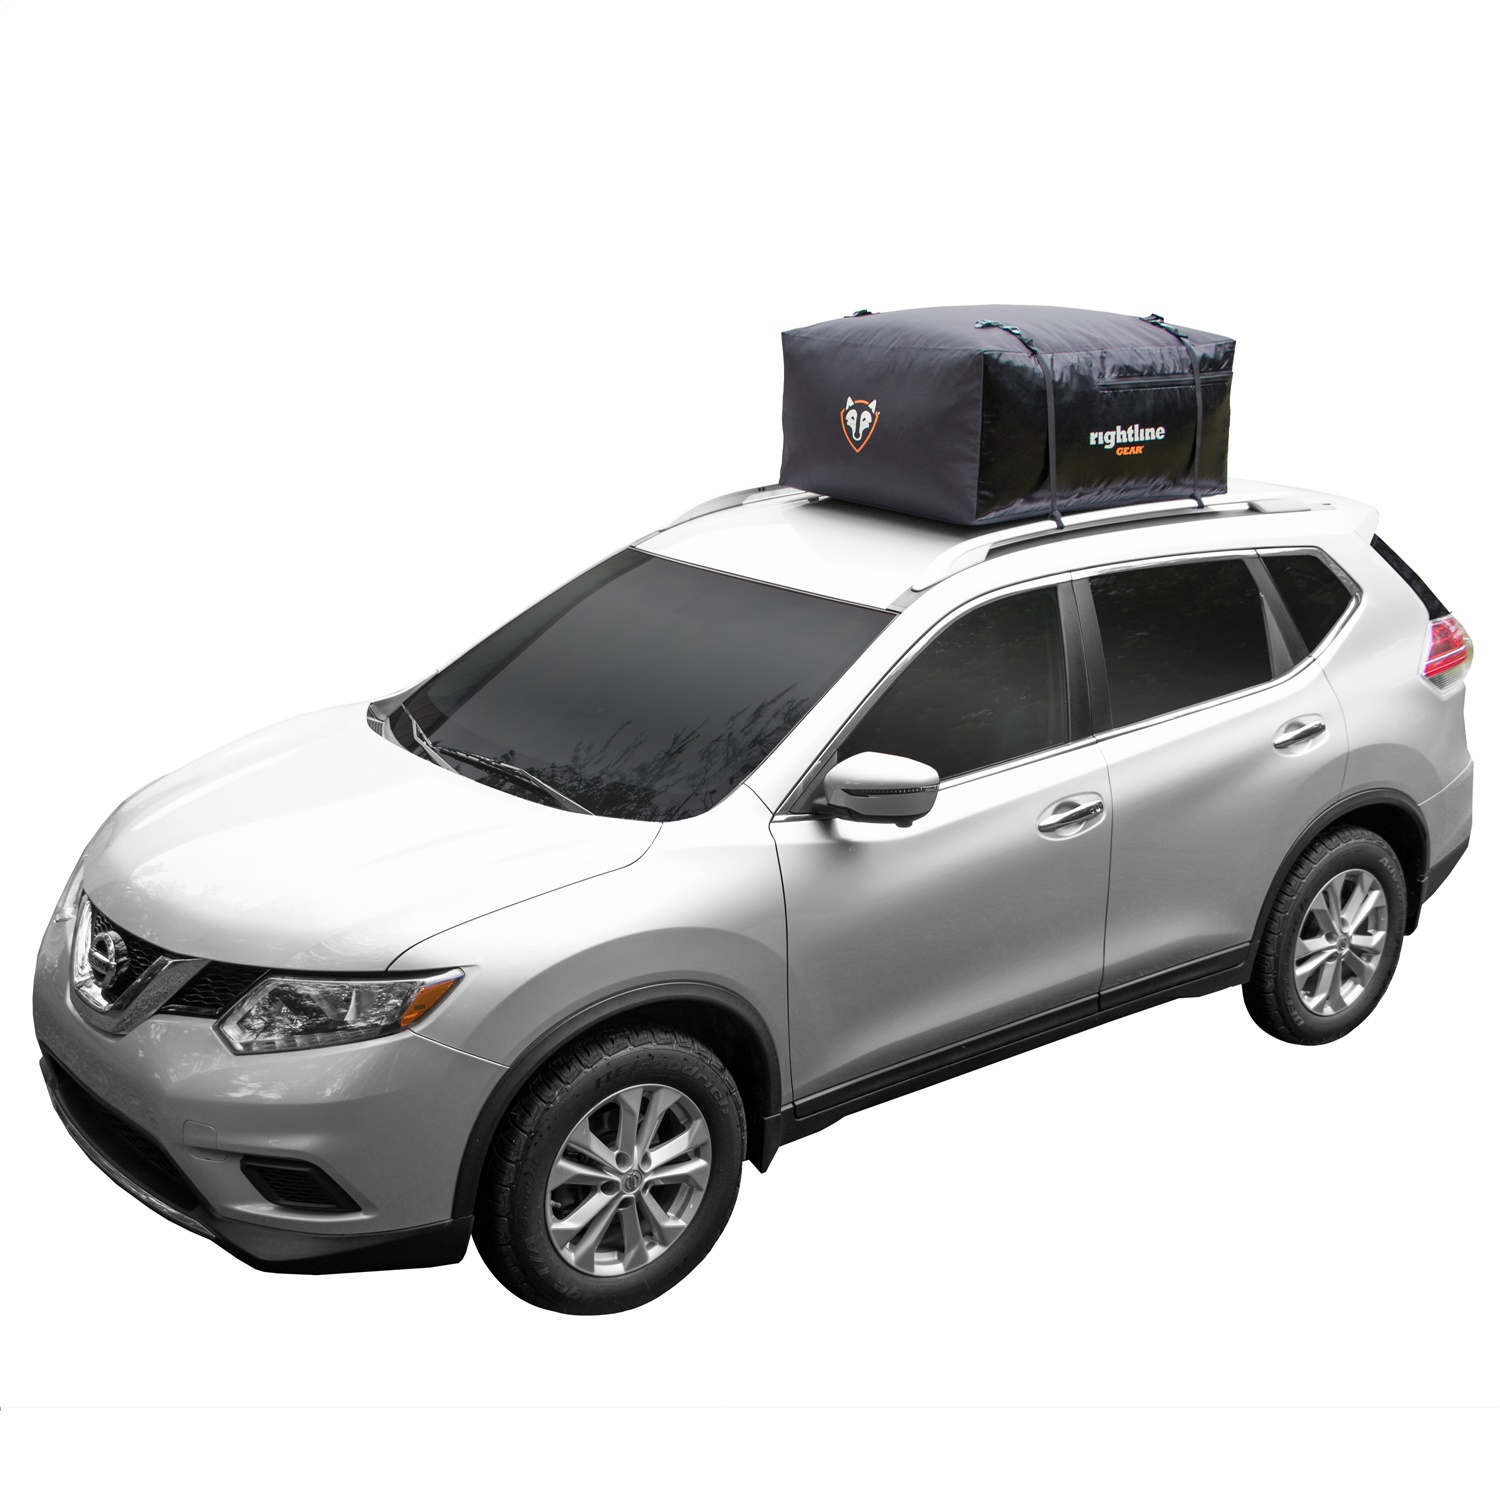 Rightline Gear Sport 2 Car Top Carrier, 100S20 Fits select: 1997-2019 HONDA CR-V, 2001-2019 FORD ESCAPE - image 5 of 6